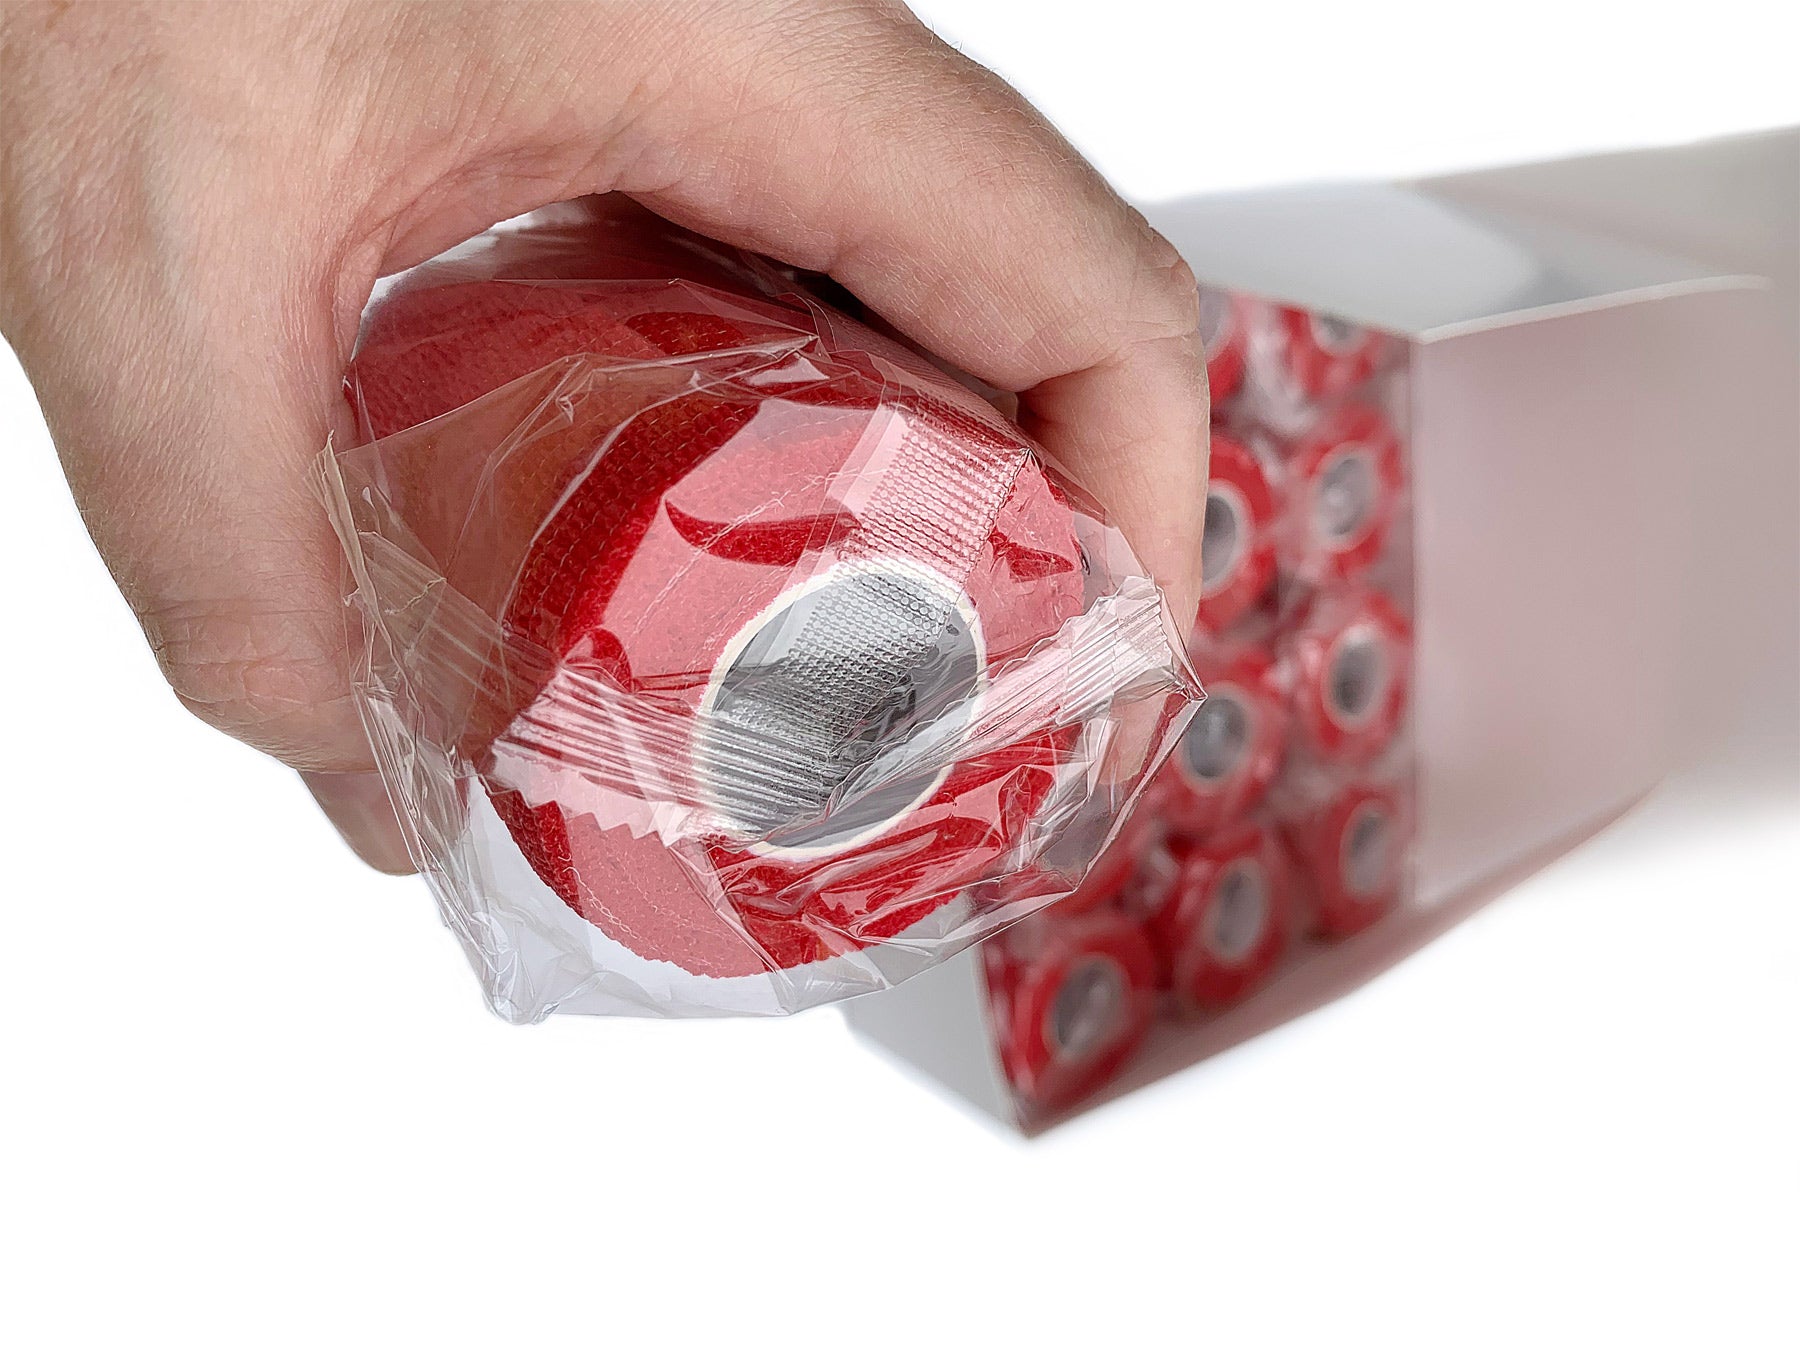 WildCow 3 Inch Red Vet Wrap - 12 Rolls Wrapped in Plastic with Box